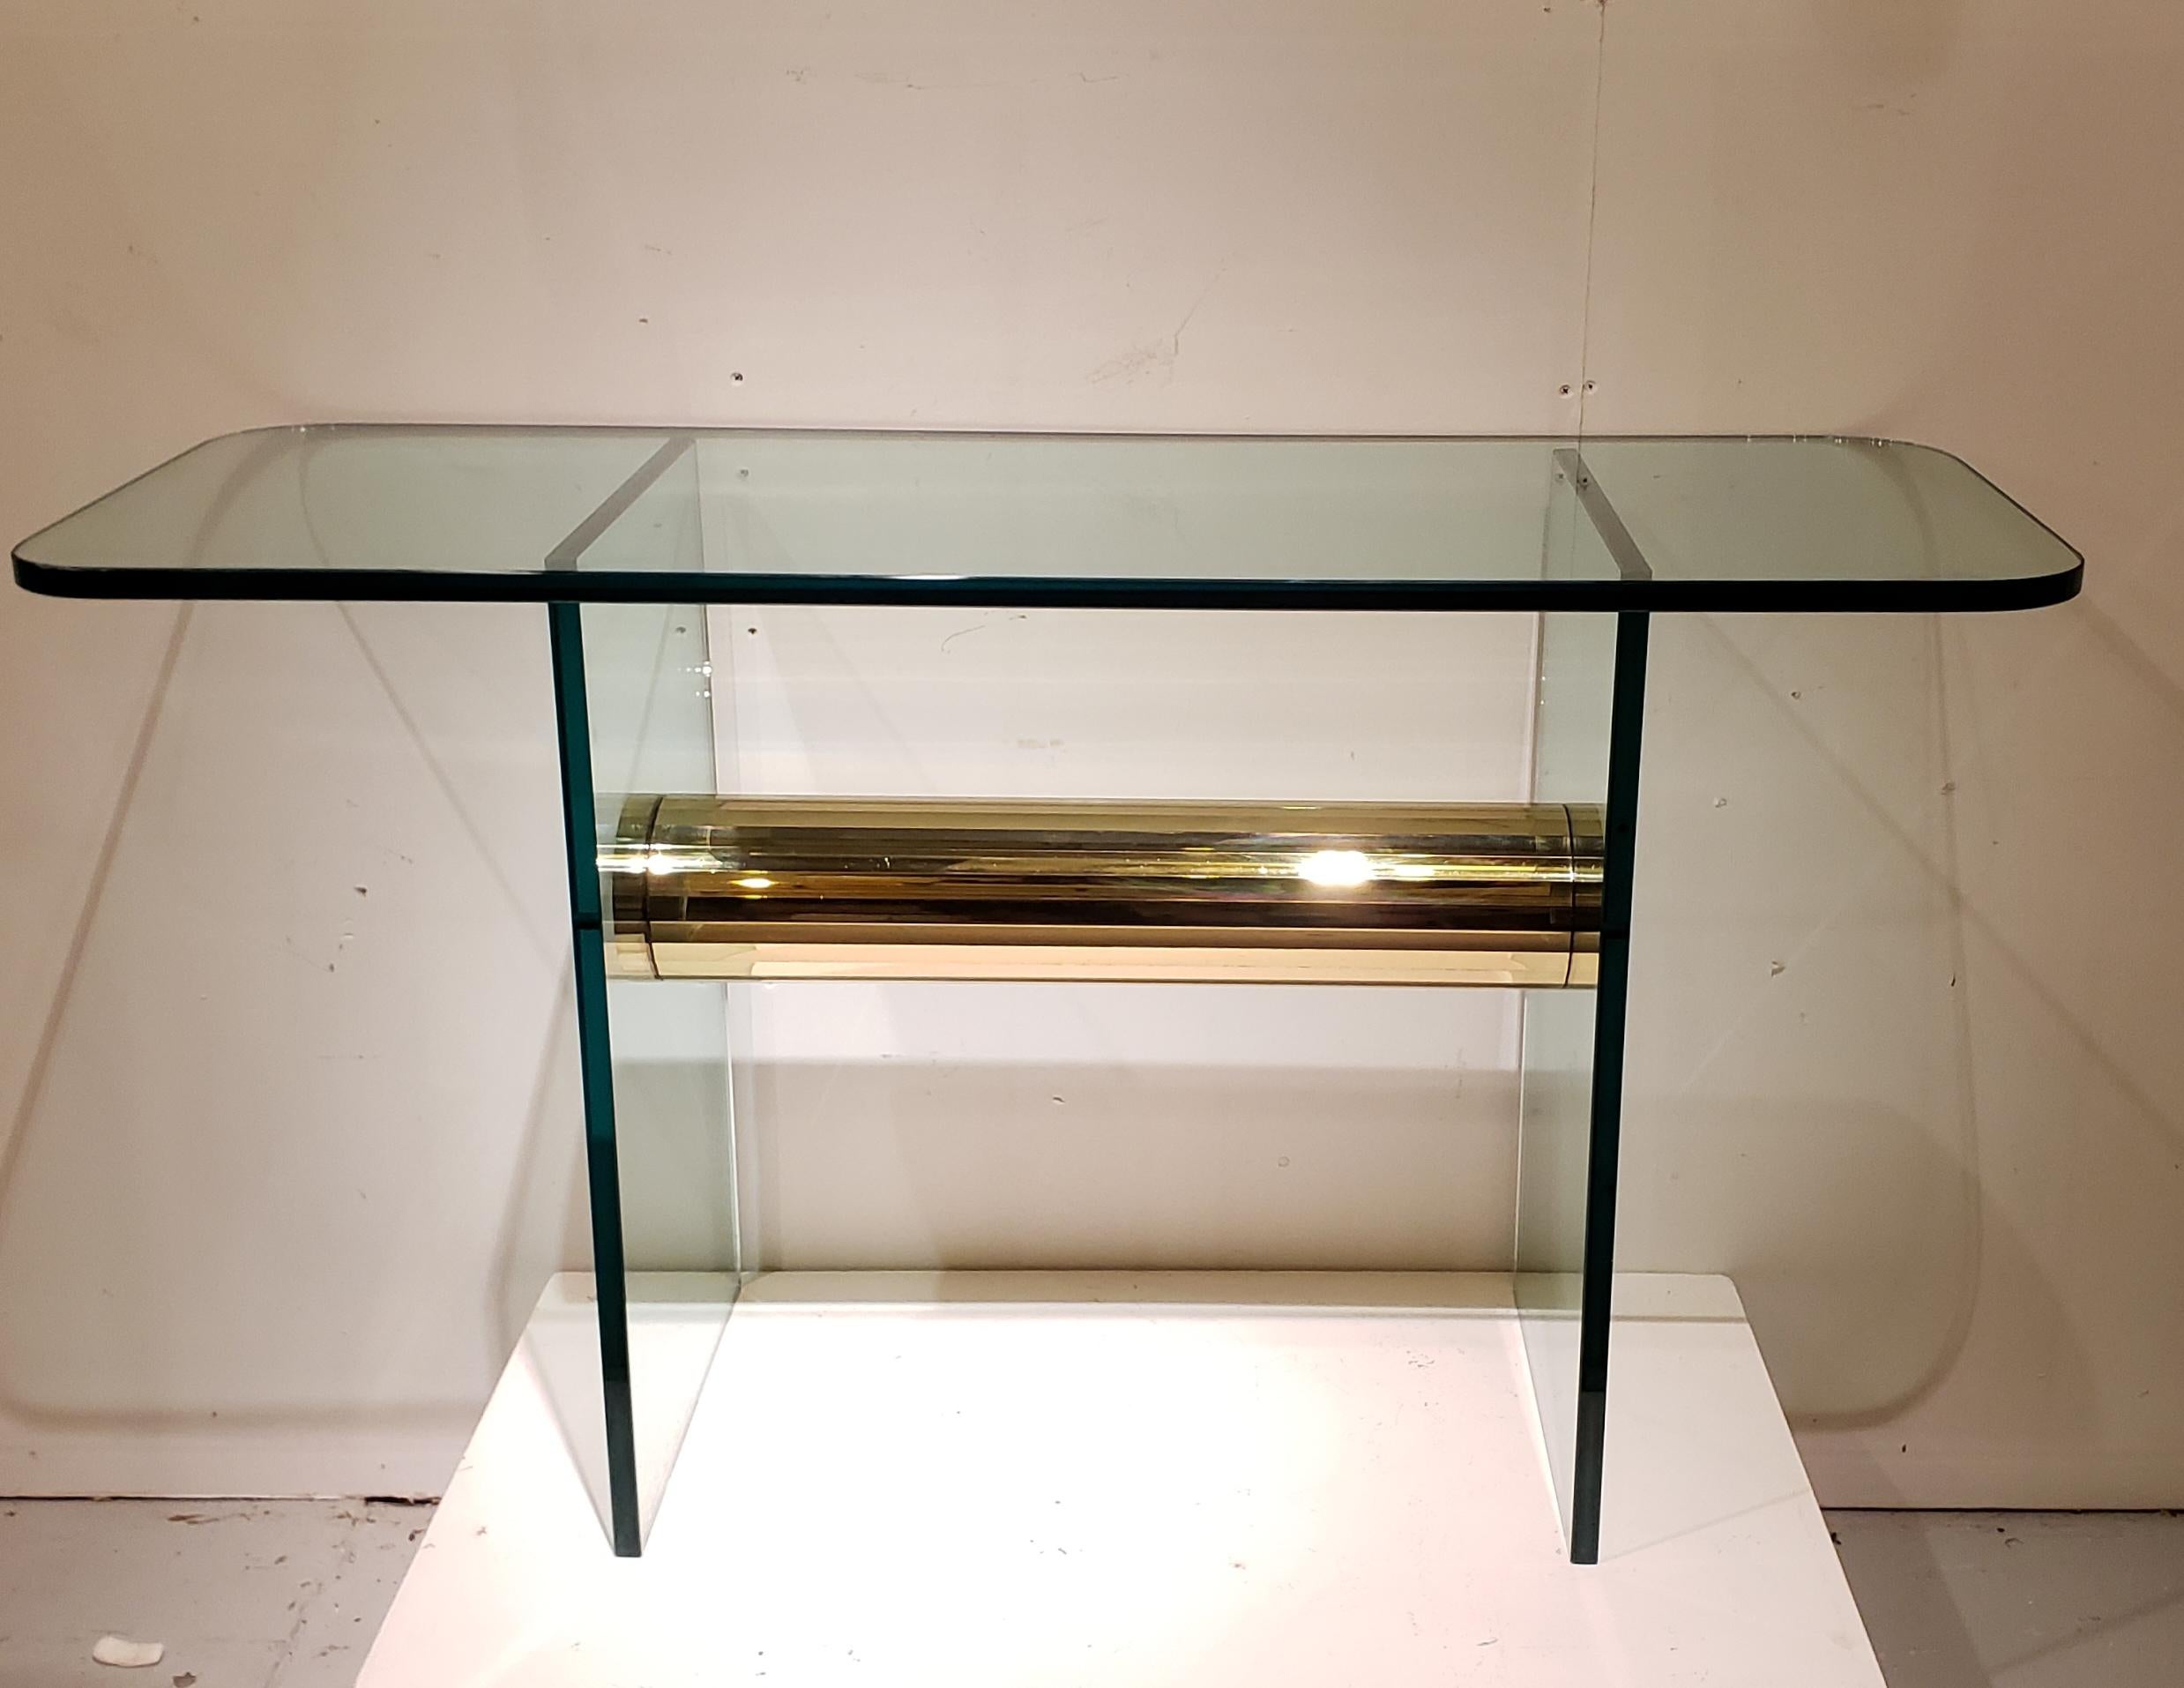 A very chic console made of heavy glass and brass. Easy to disassemble for shipping.
Can also be used as a small desk.

This item is easy to disassemble for shipping purposes
  